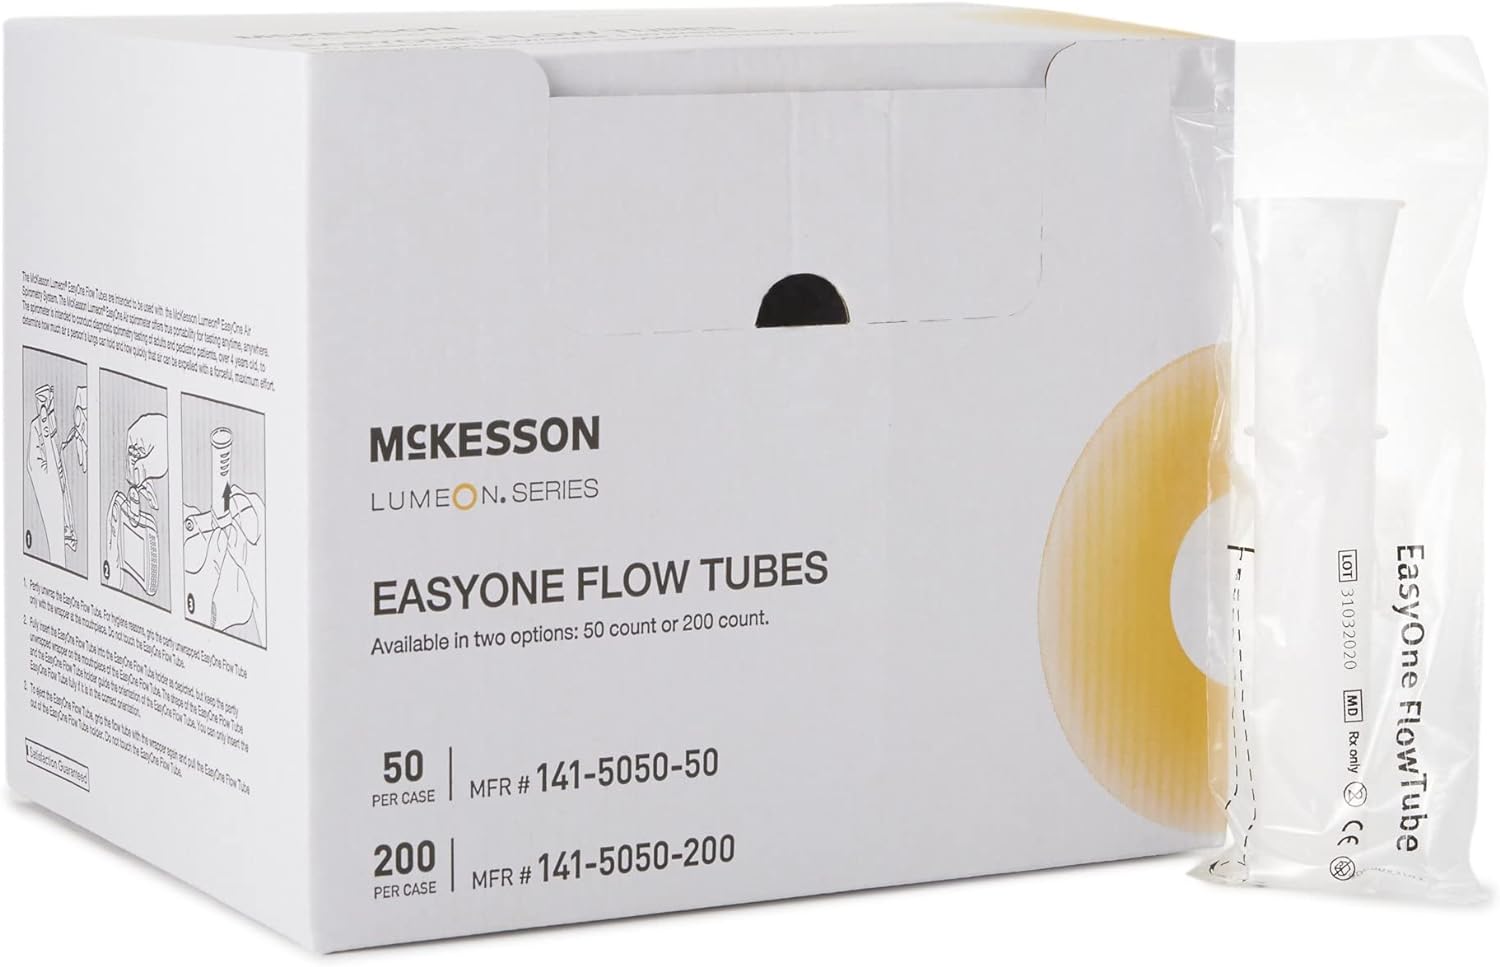 McKesson LUMEON Flow Tube - Disposable Mouthpiece, Non-Sterile Plastic Mouthpiece for Air Spirometry System, One Size, 200 Count